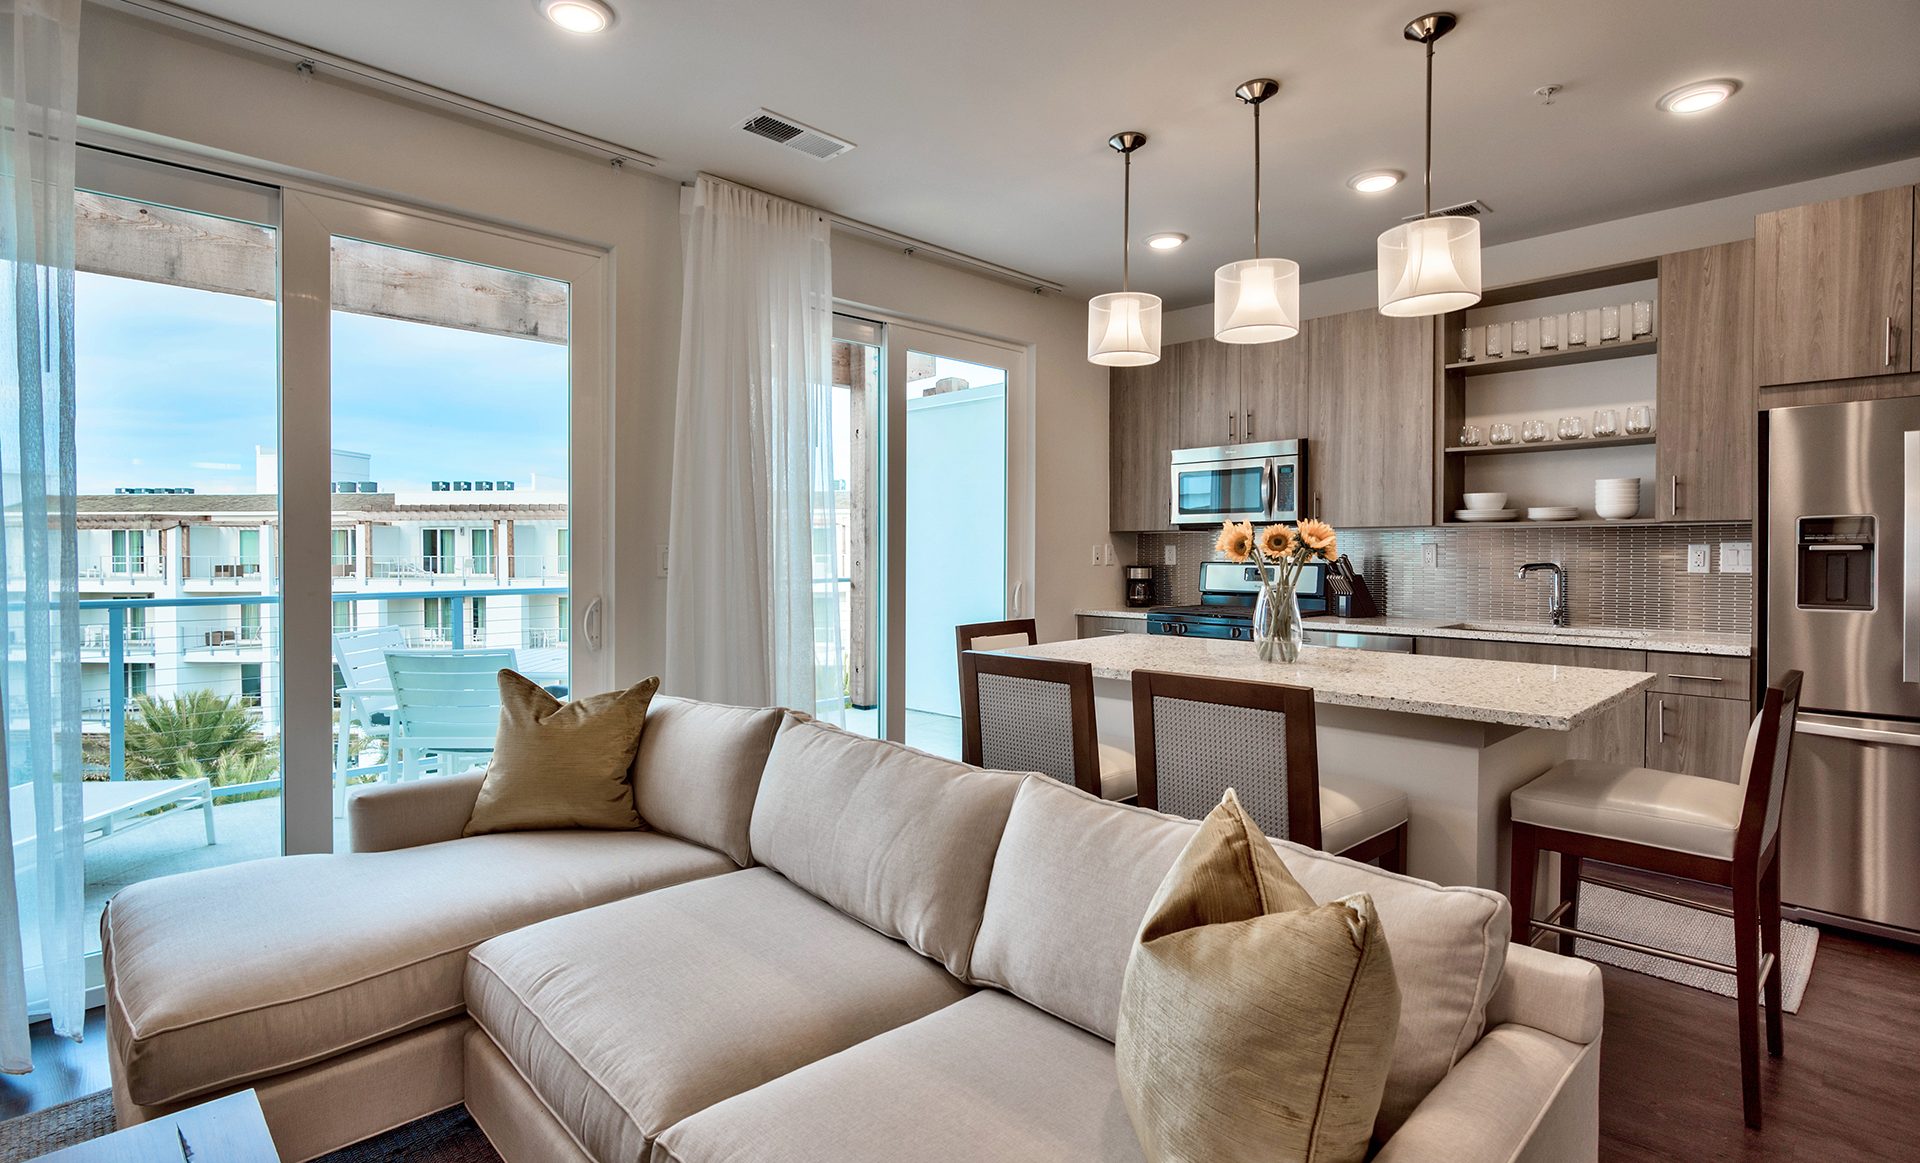 hpa design group the pointe on 30 a unit interior design 1